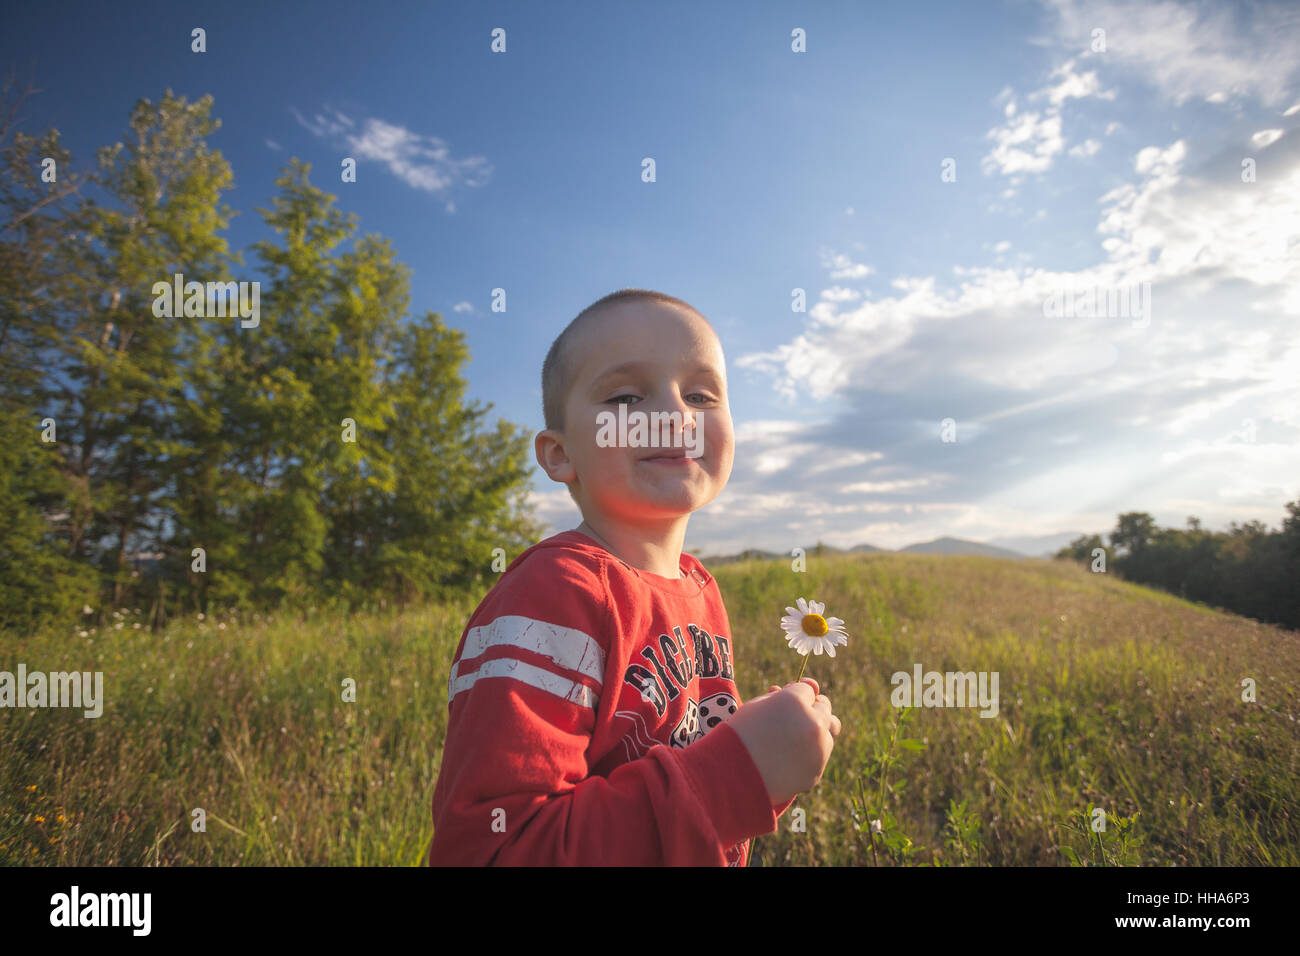 Smiling little kid boy in red blouse keep a daisy in hand on a green field Stock Photo